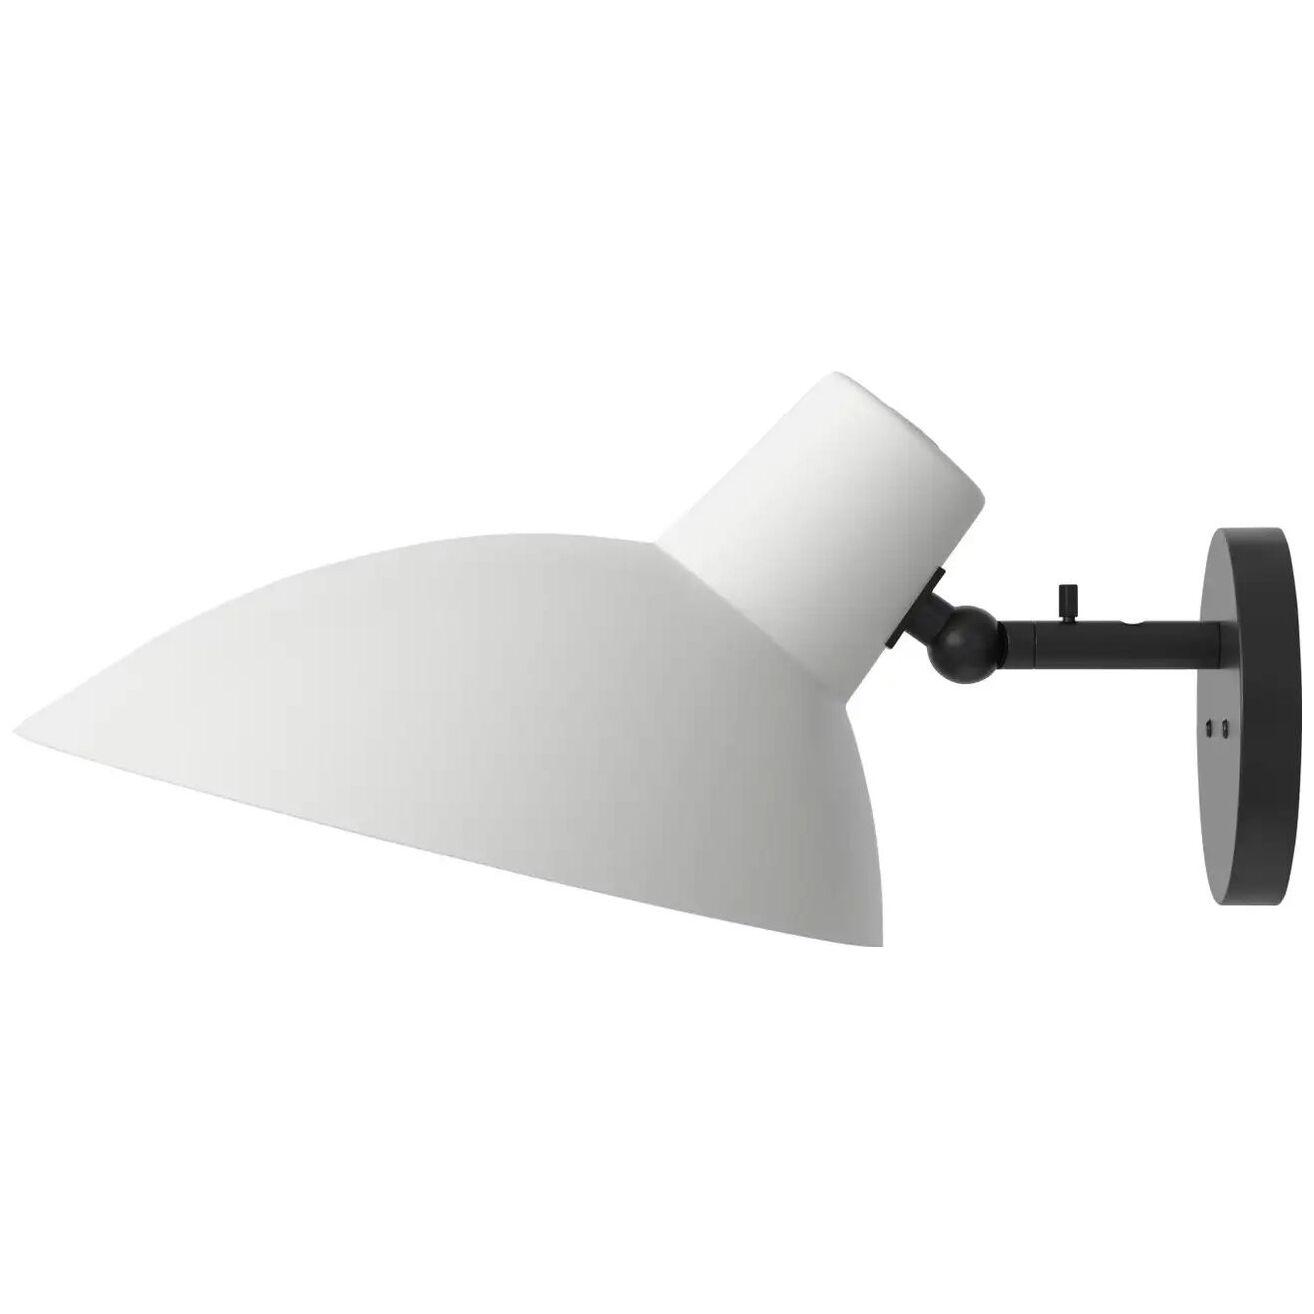 VV Cinquanta Black and White Wall Lamp Designed by Vittoriano Viganò for Astep